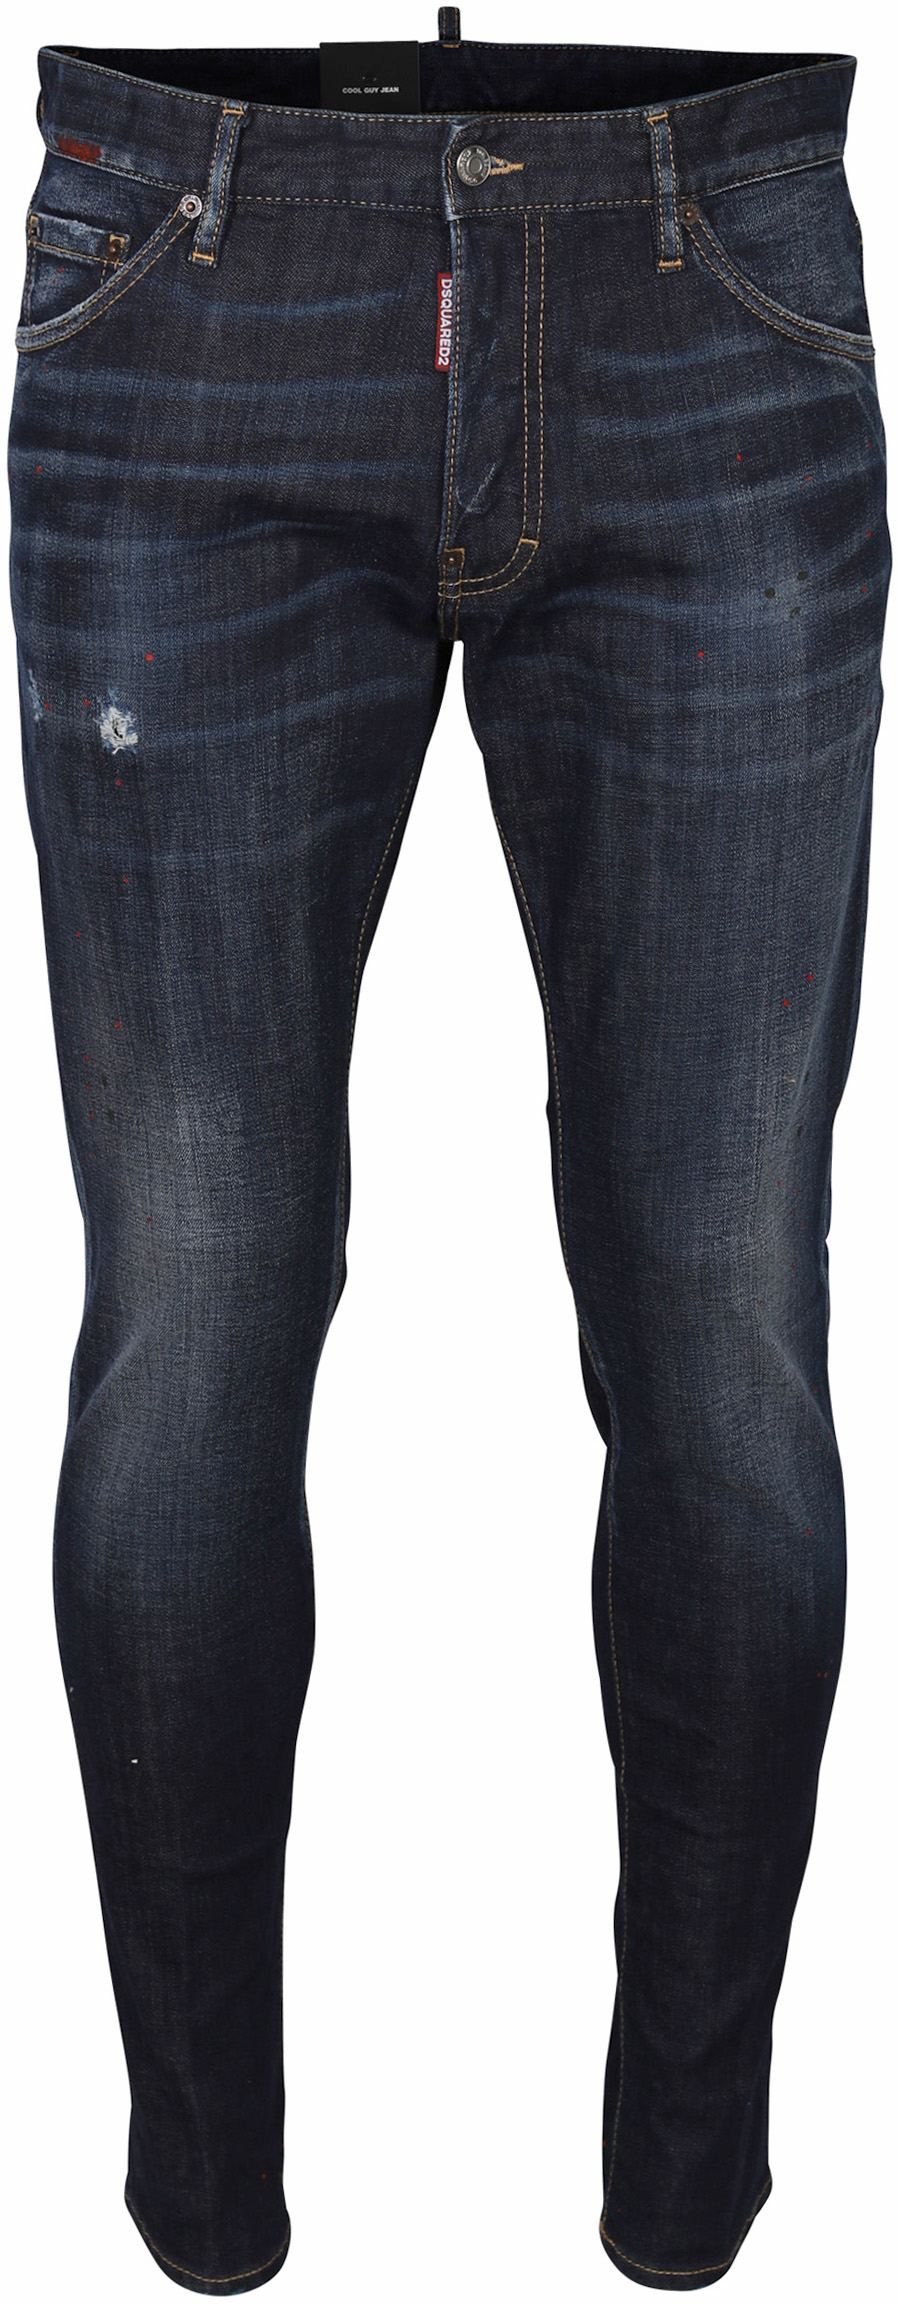 Dsquared Patched Jeans Cool Guy Blue Washed